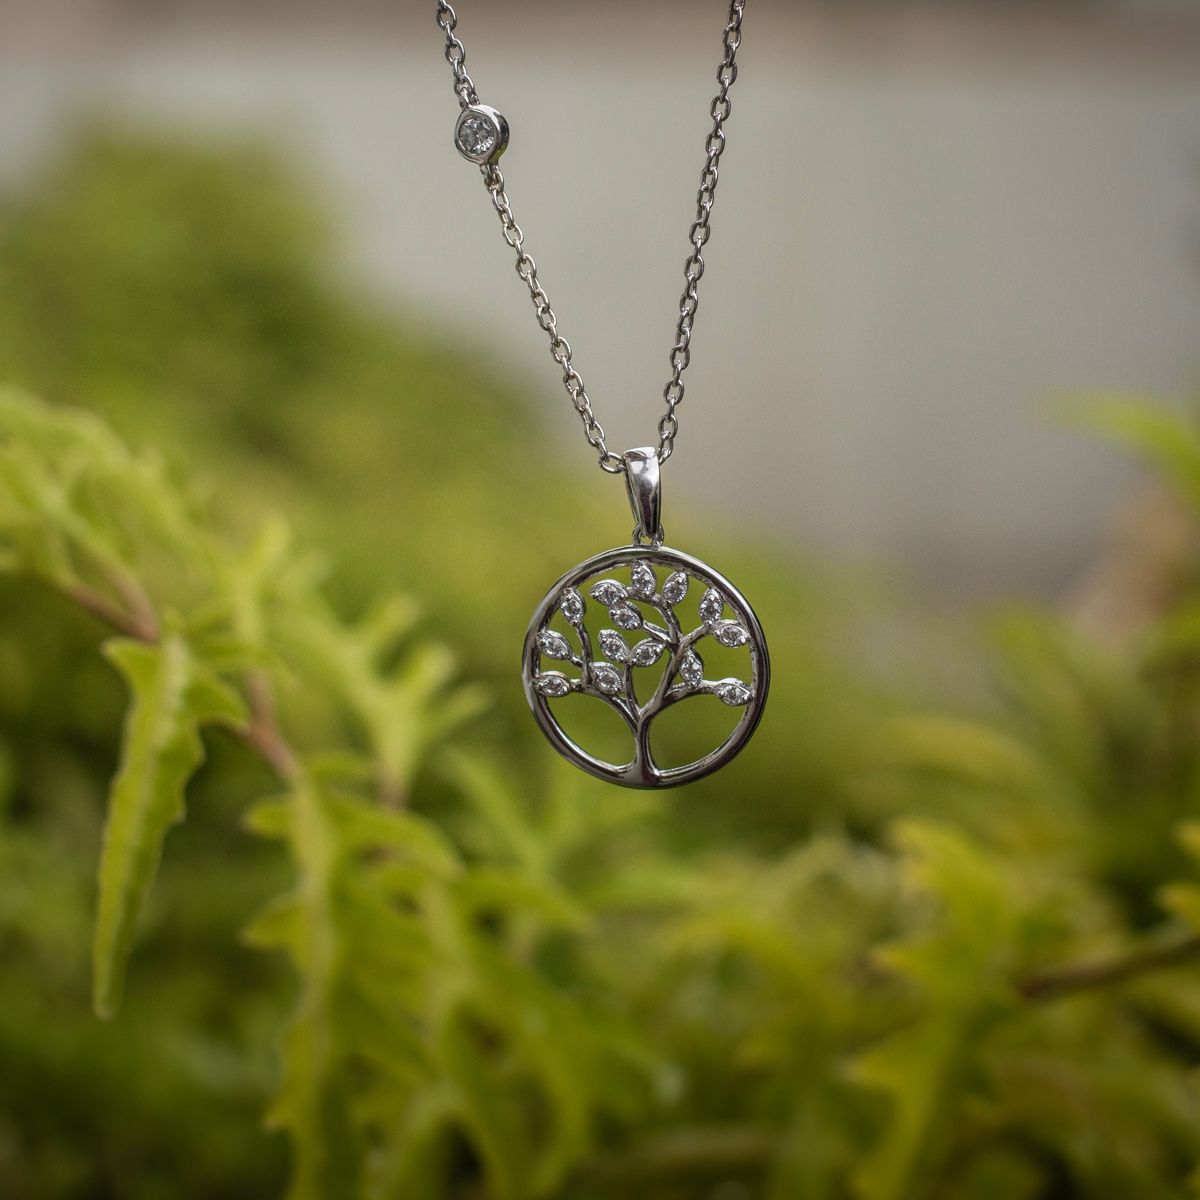 Shades of Green Tree of Life Necklace – Celtic Crystal Design Jewelry